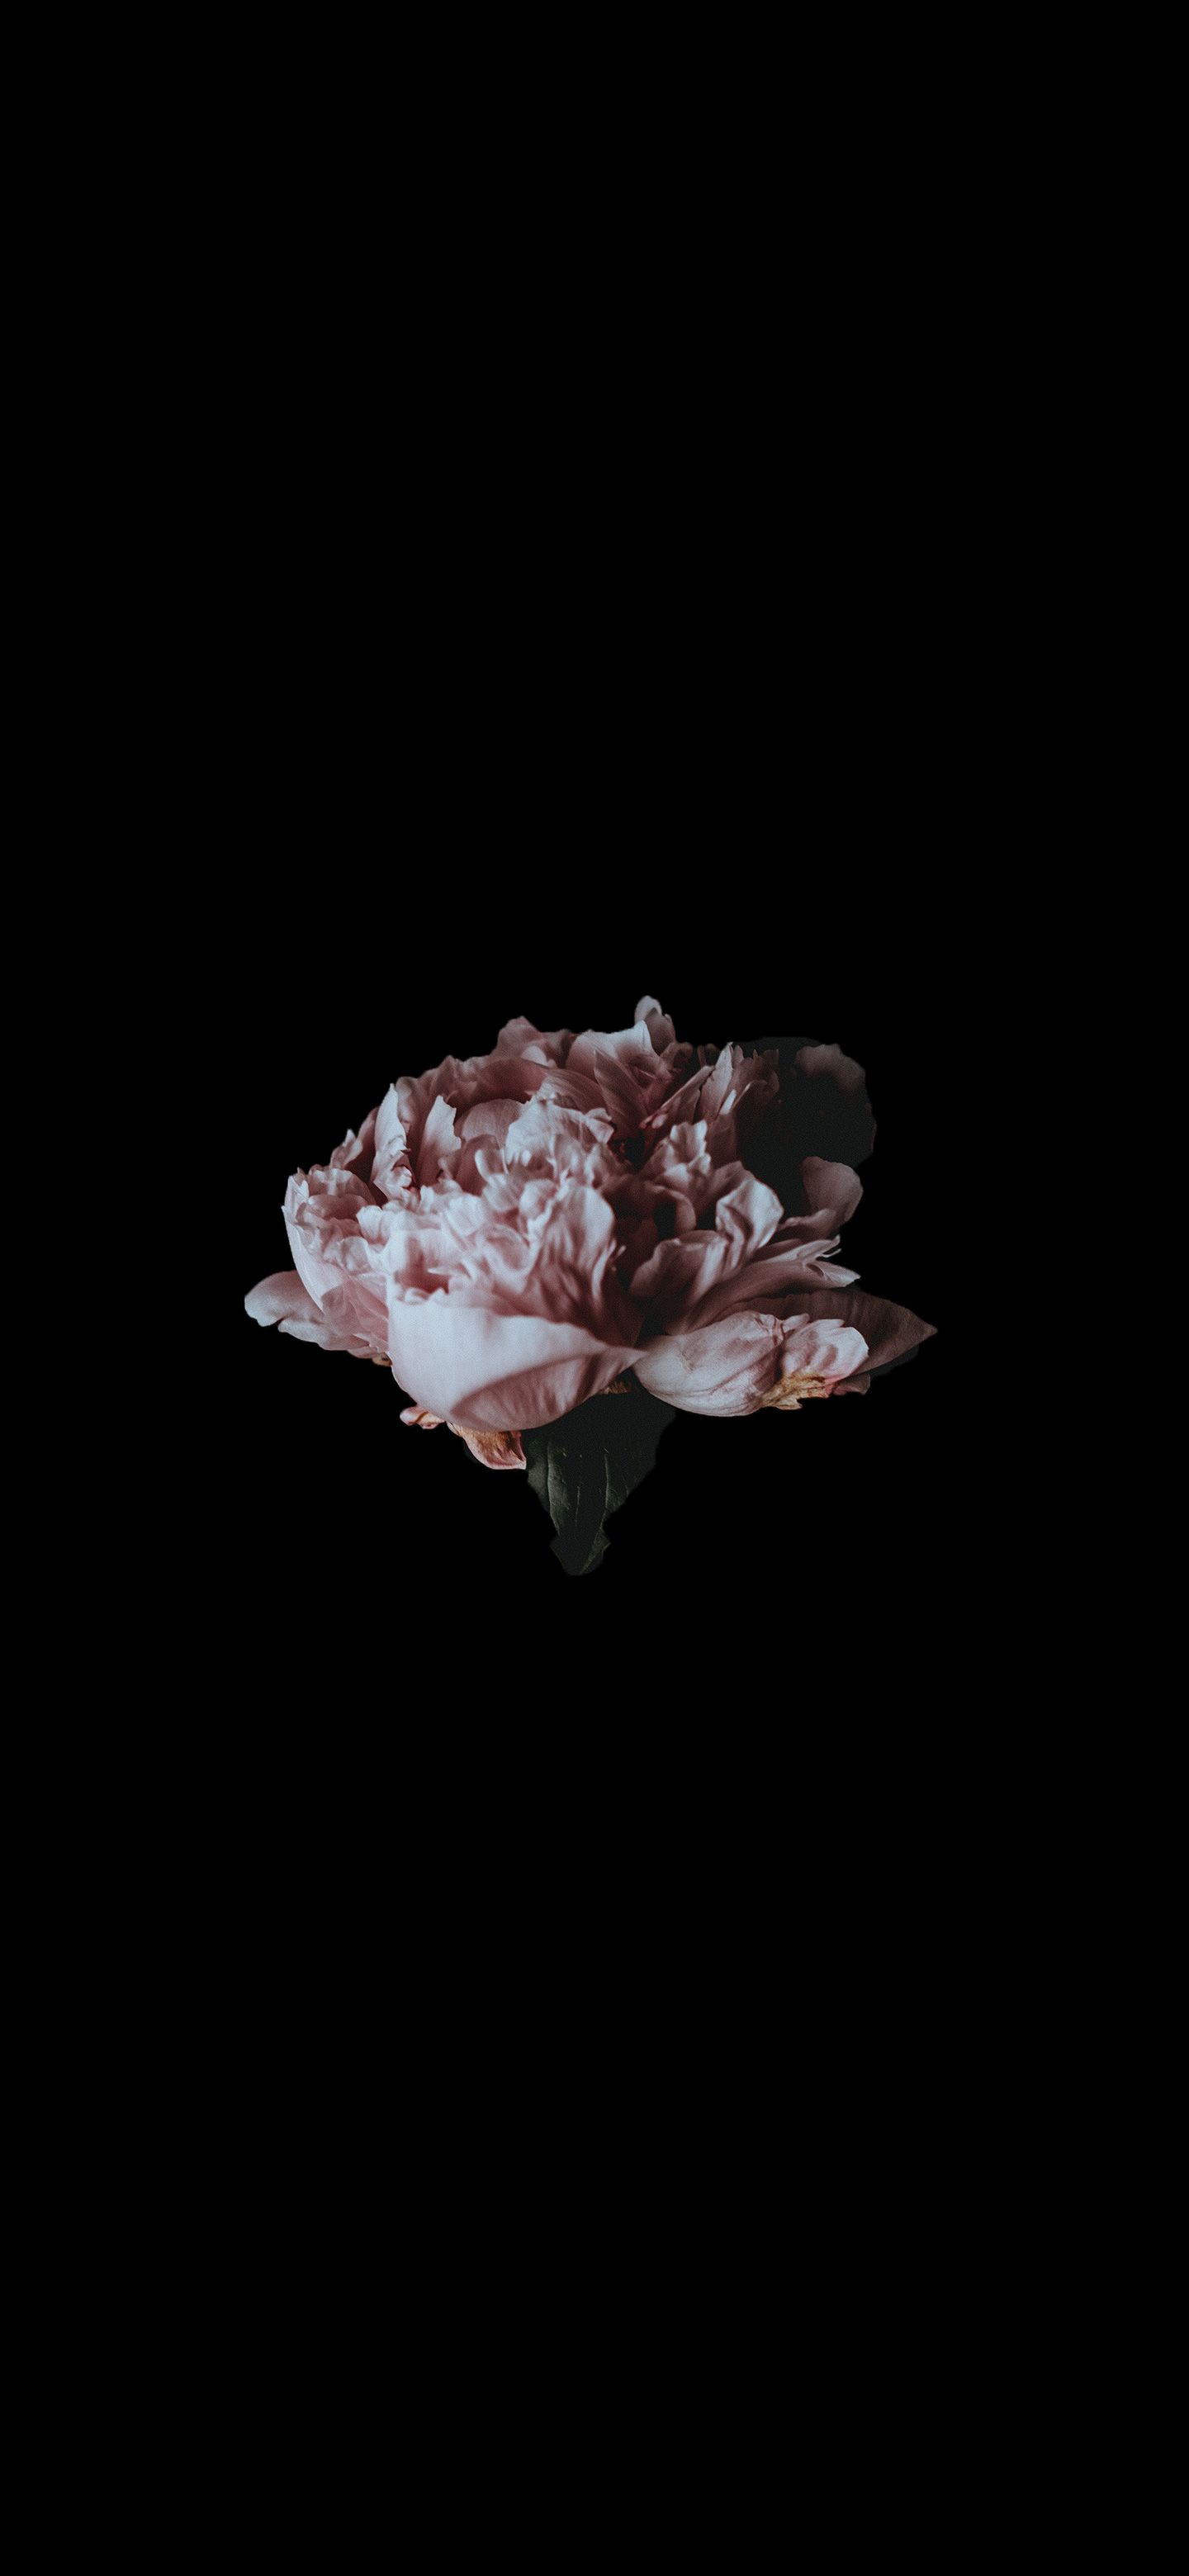 Amoled Black Flowers Wallpapers - Wallpaper Cave